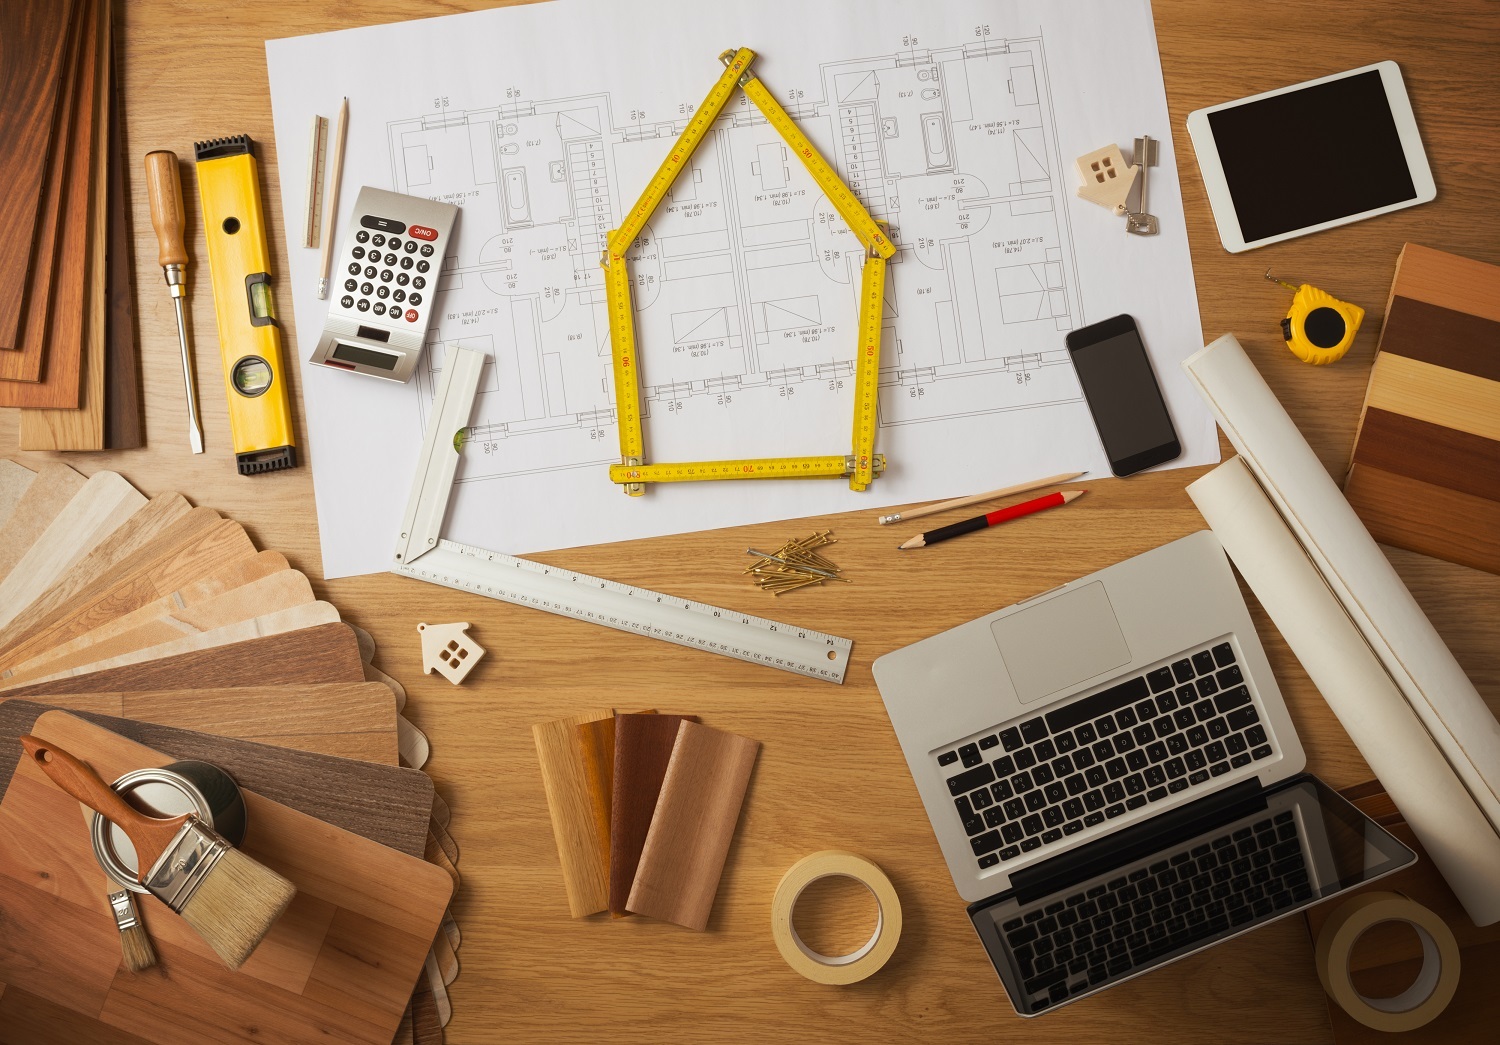 You Need to Buy the Right Property and Take Planning Permissions When You Renovate a Home?